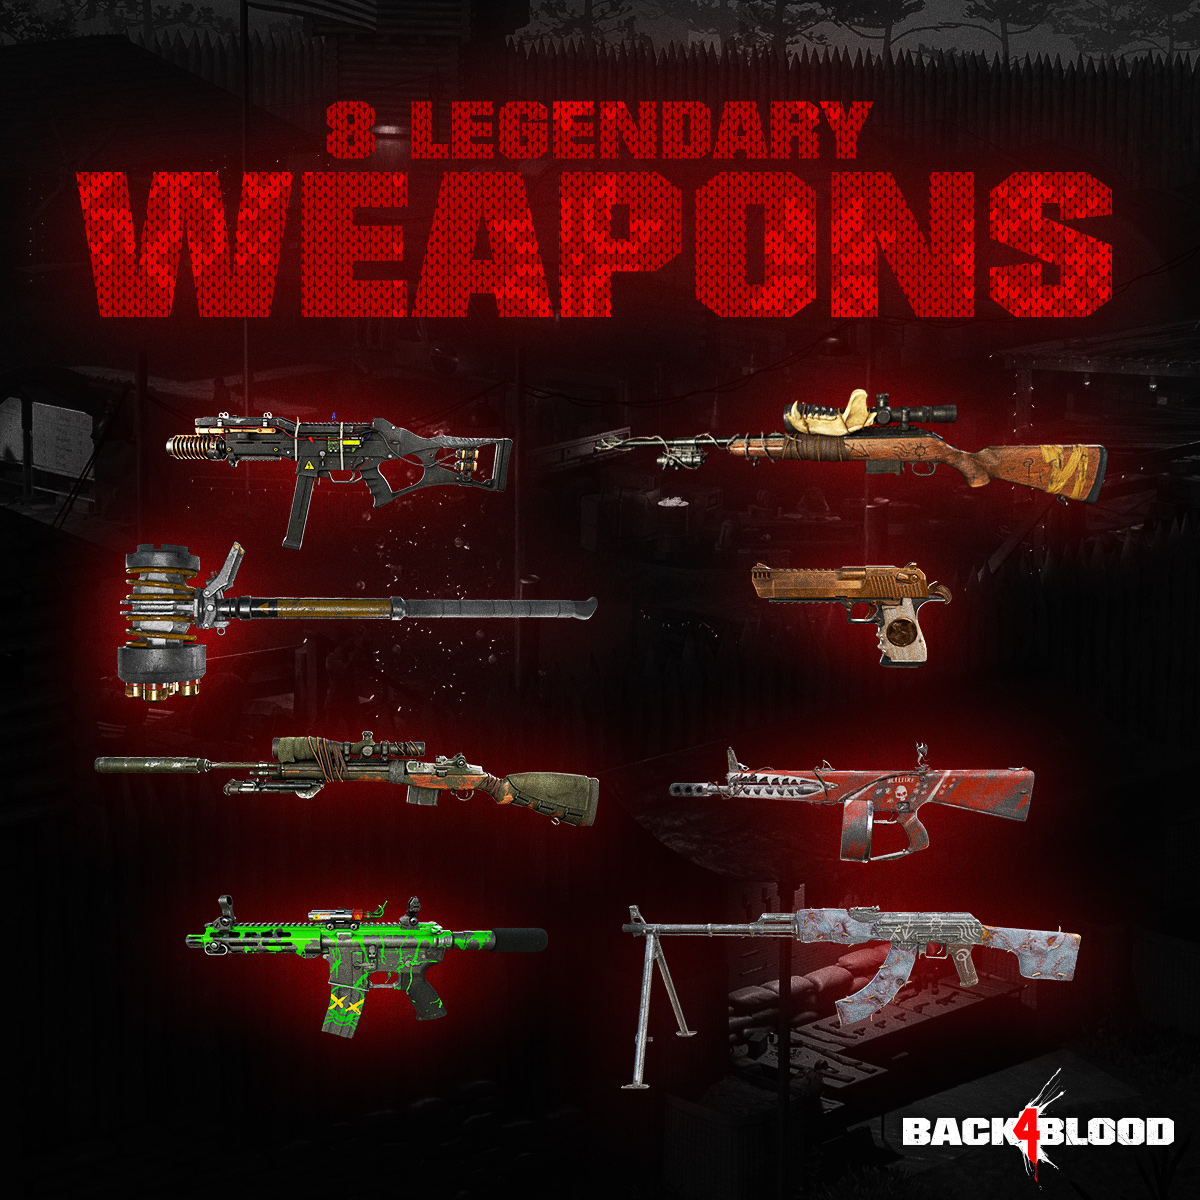 On the eighth day of Riddenmas, Phillips gave to me: eight legendary weapons.